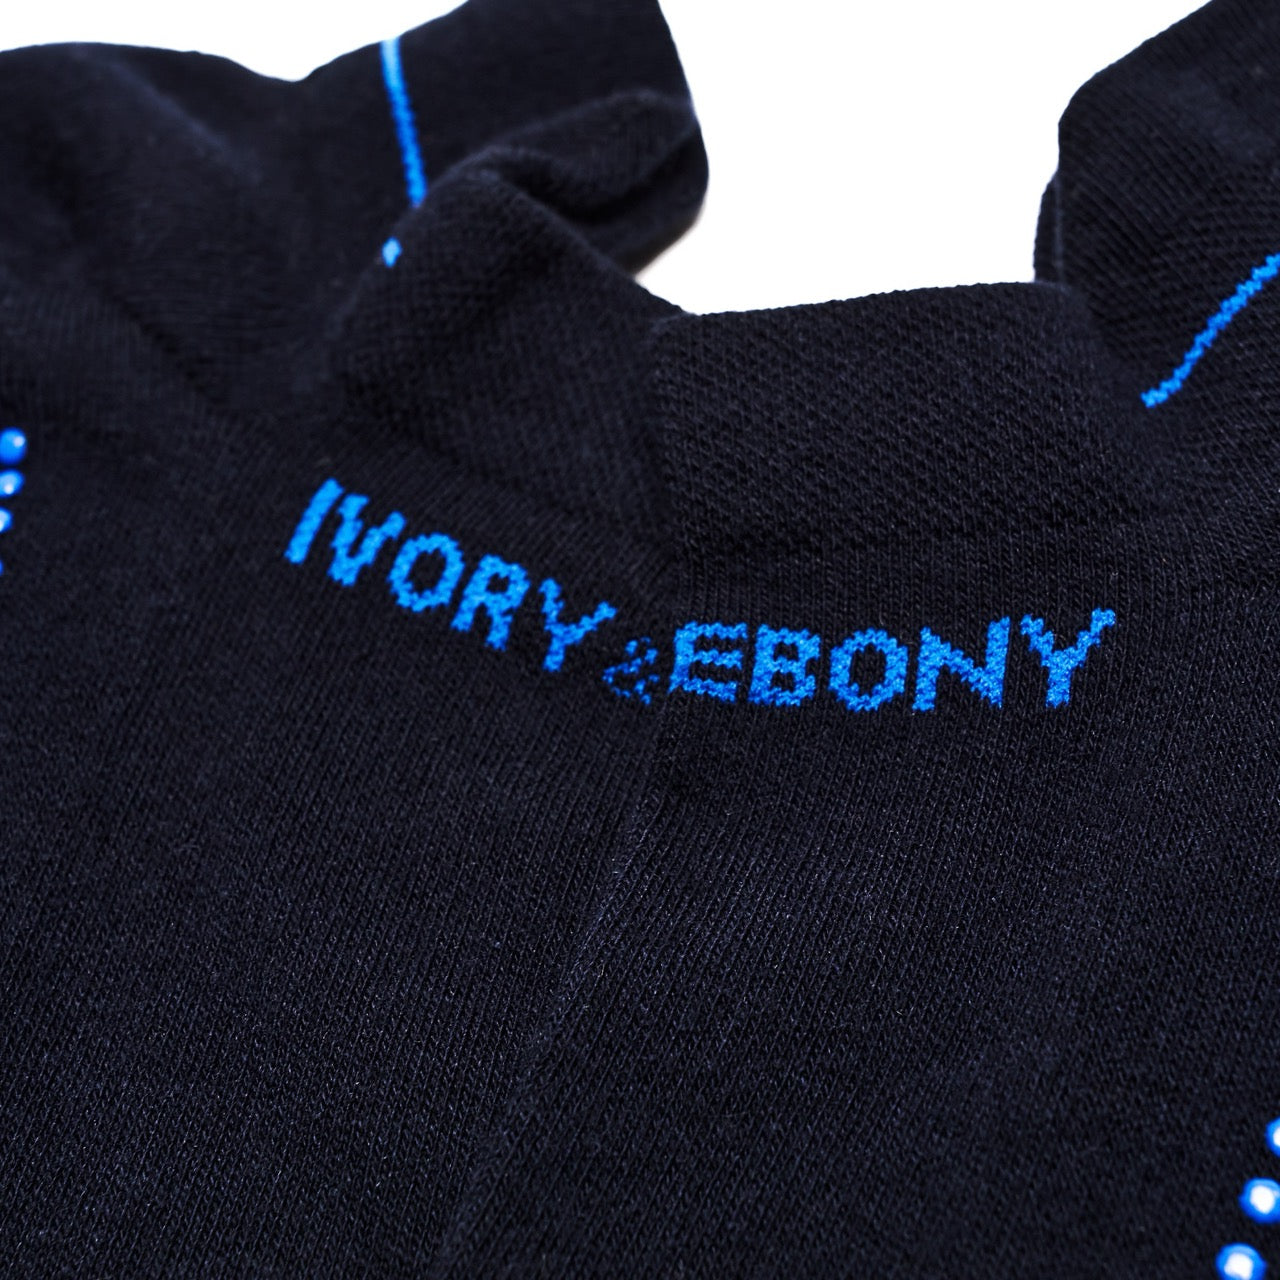 Secure Steps in Style: Men's Blue Anti-Slip Ankle Socks by Ivory & Ebony - Featuring Extra-Long Staple Cotton, Cushioned Footbed, Blister Tab, Seamless Toe.